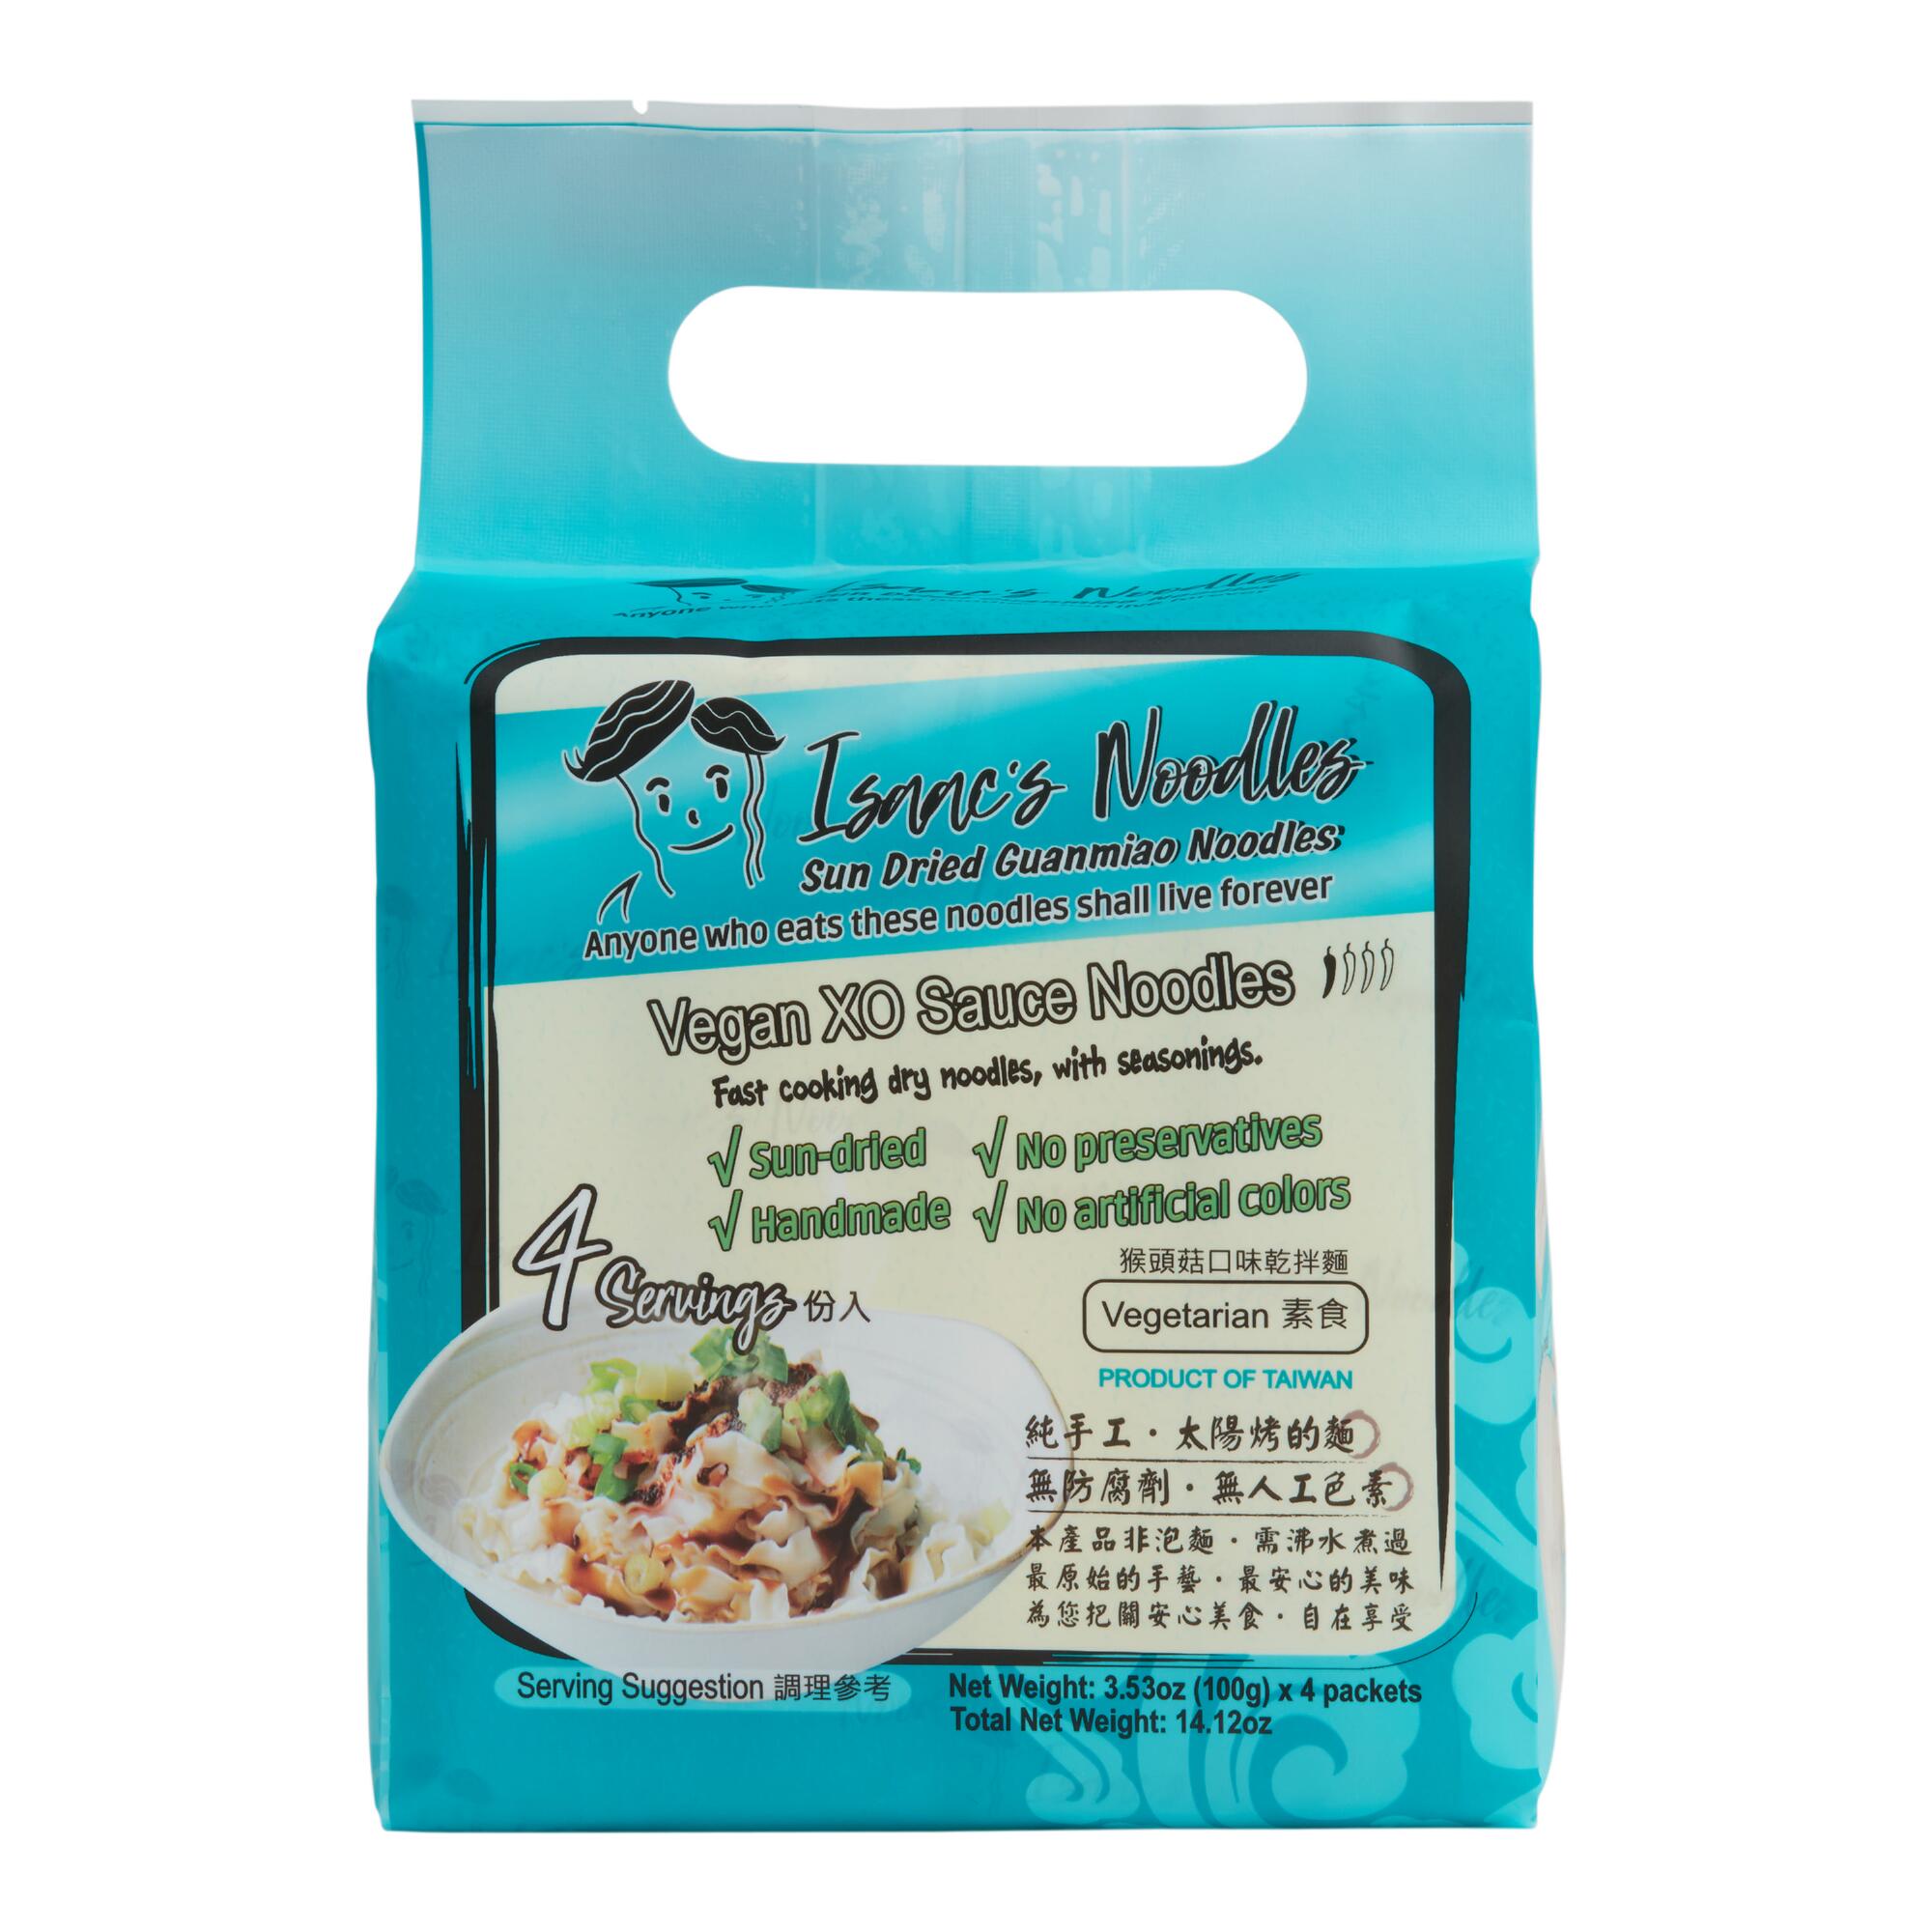 Isaac's Noodles XO Noodles 4 Pack by World Market